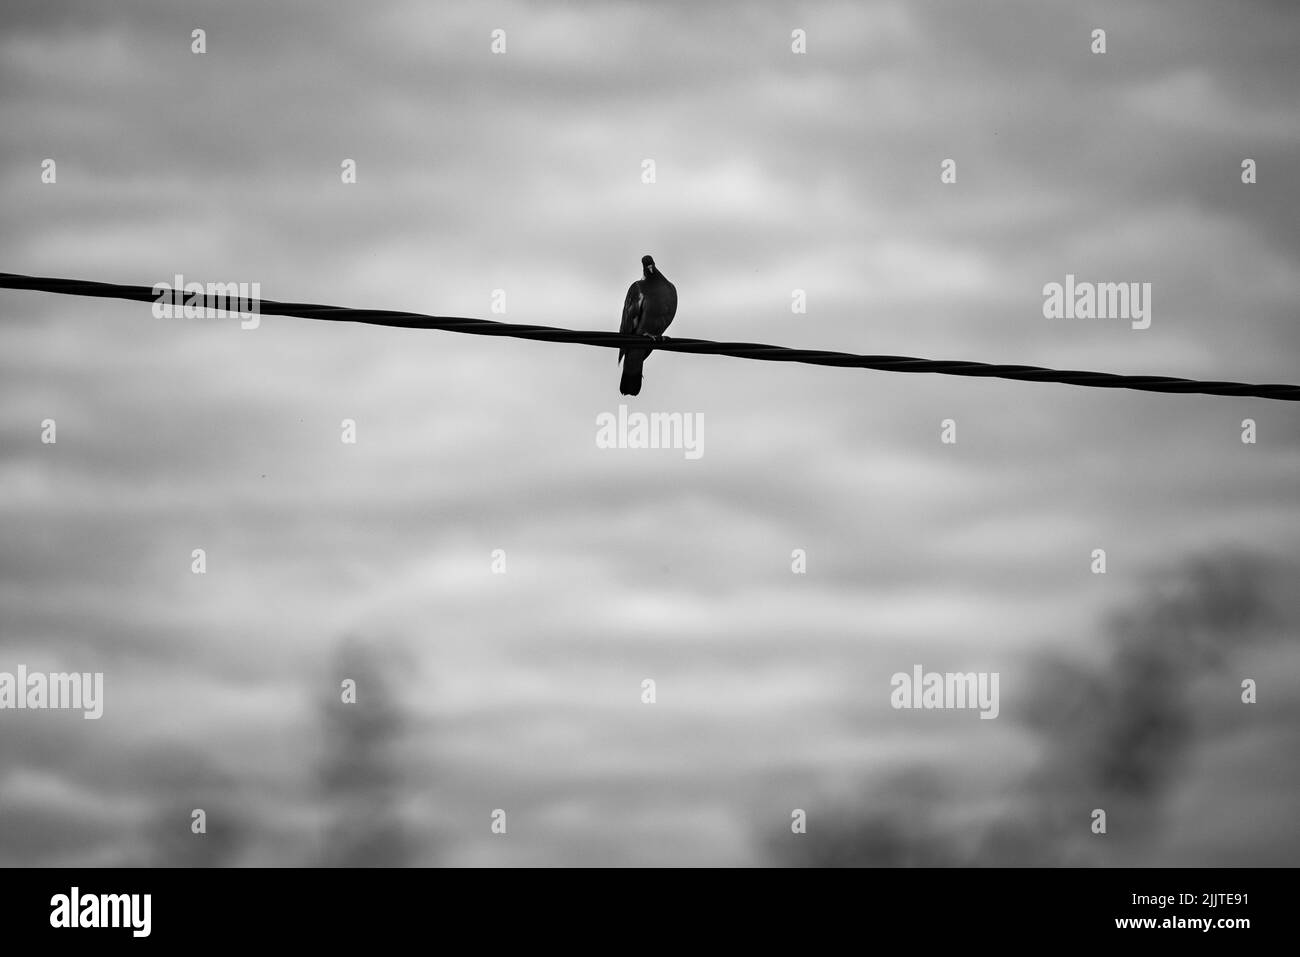 Bird on a wire with soft background in black and white Stock Photo